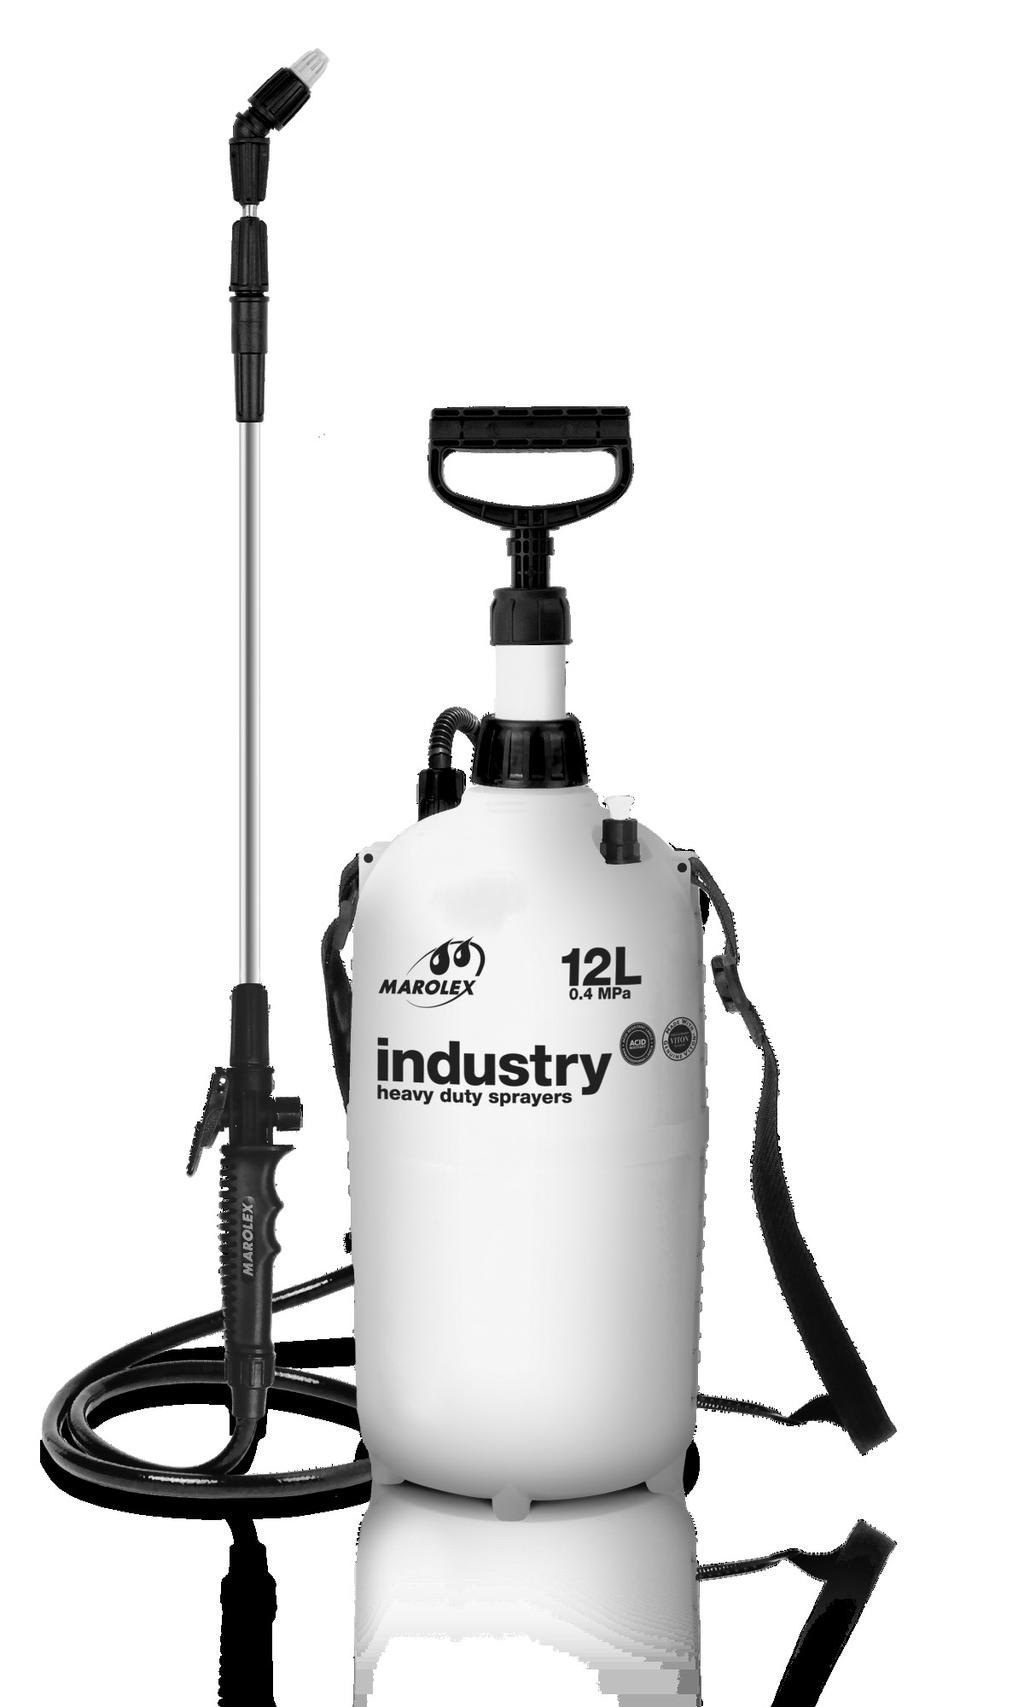 Industry Sprayer INDUSTRY Sprayer is an expert device designated for extremely heavy assignments.